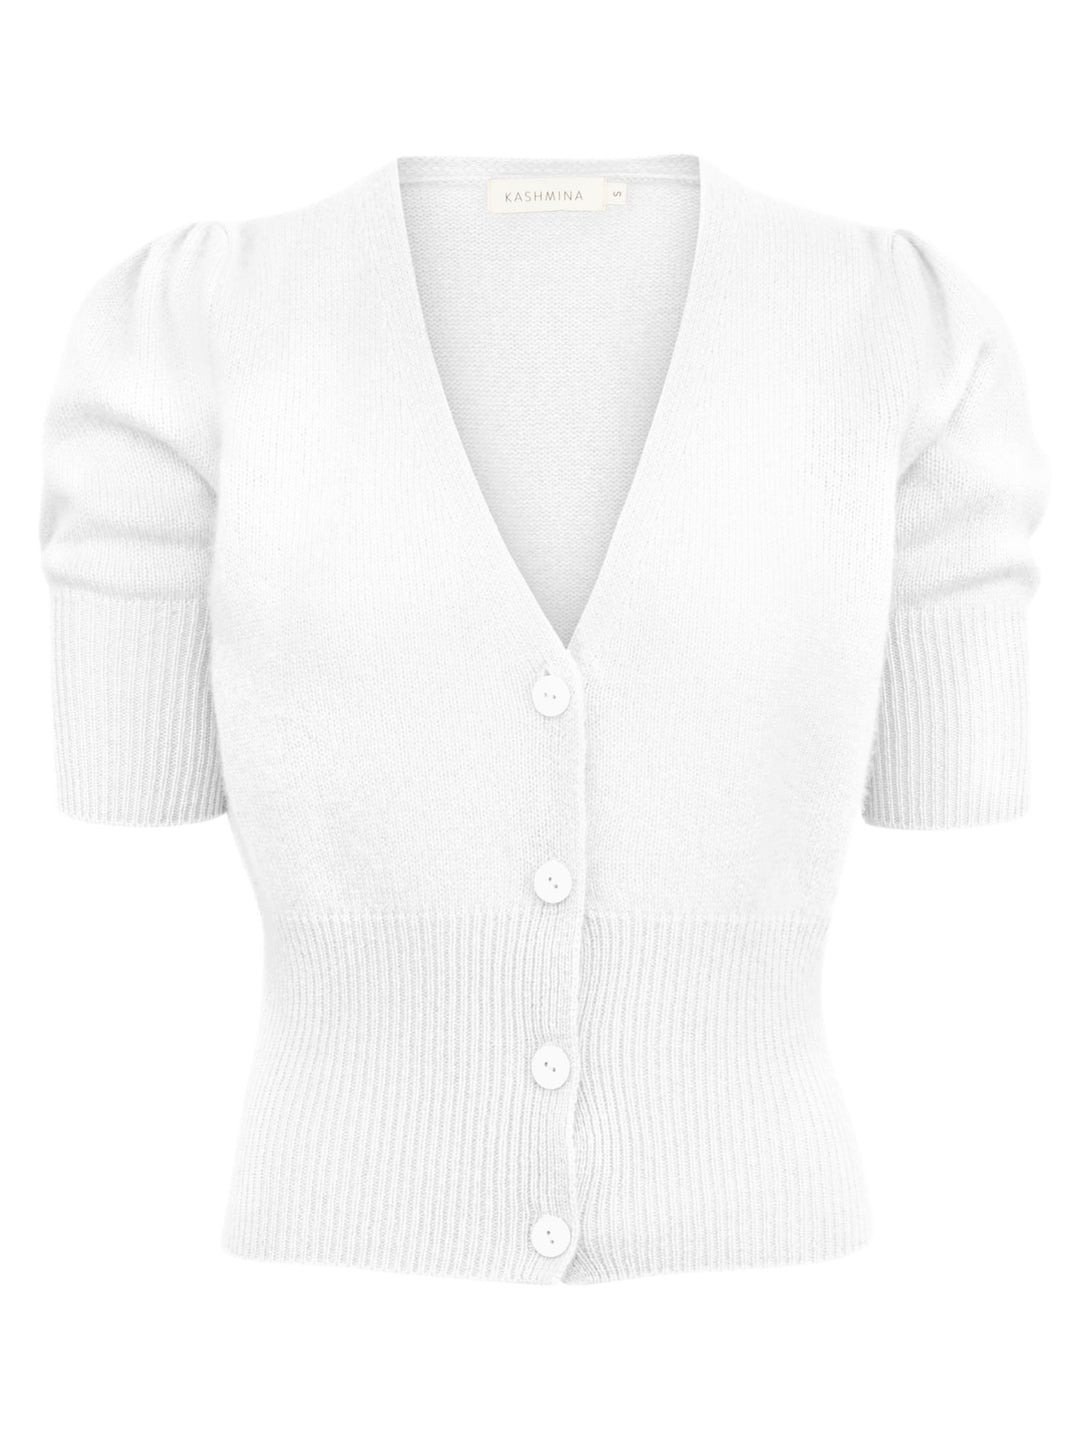 Cashmere cardigan, 100% pure cashmere, short sleeved, puff, sleeved, grace, white